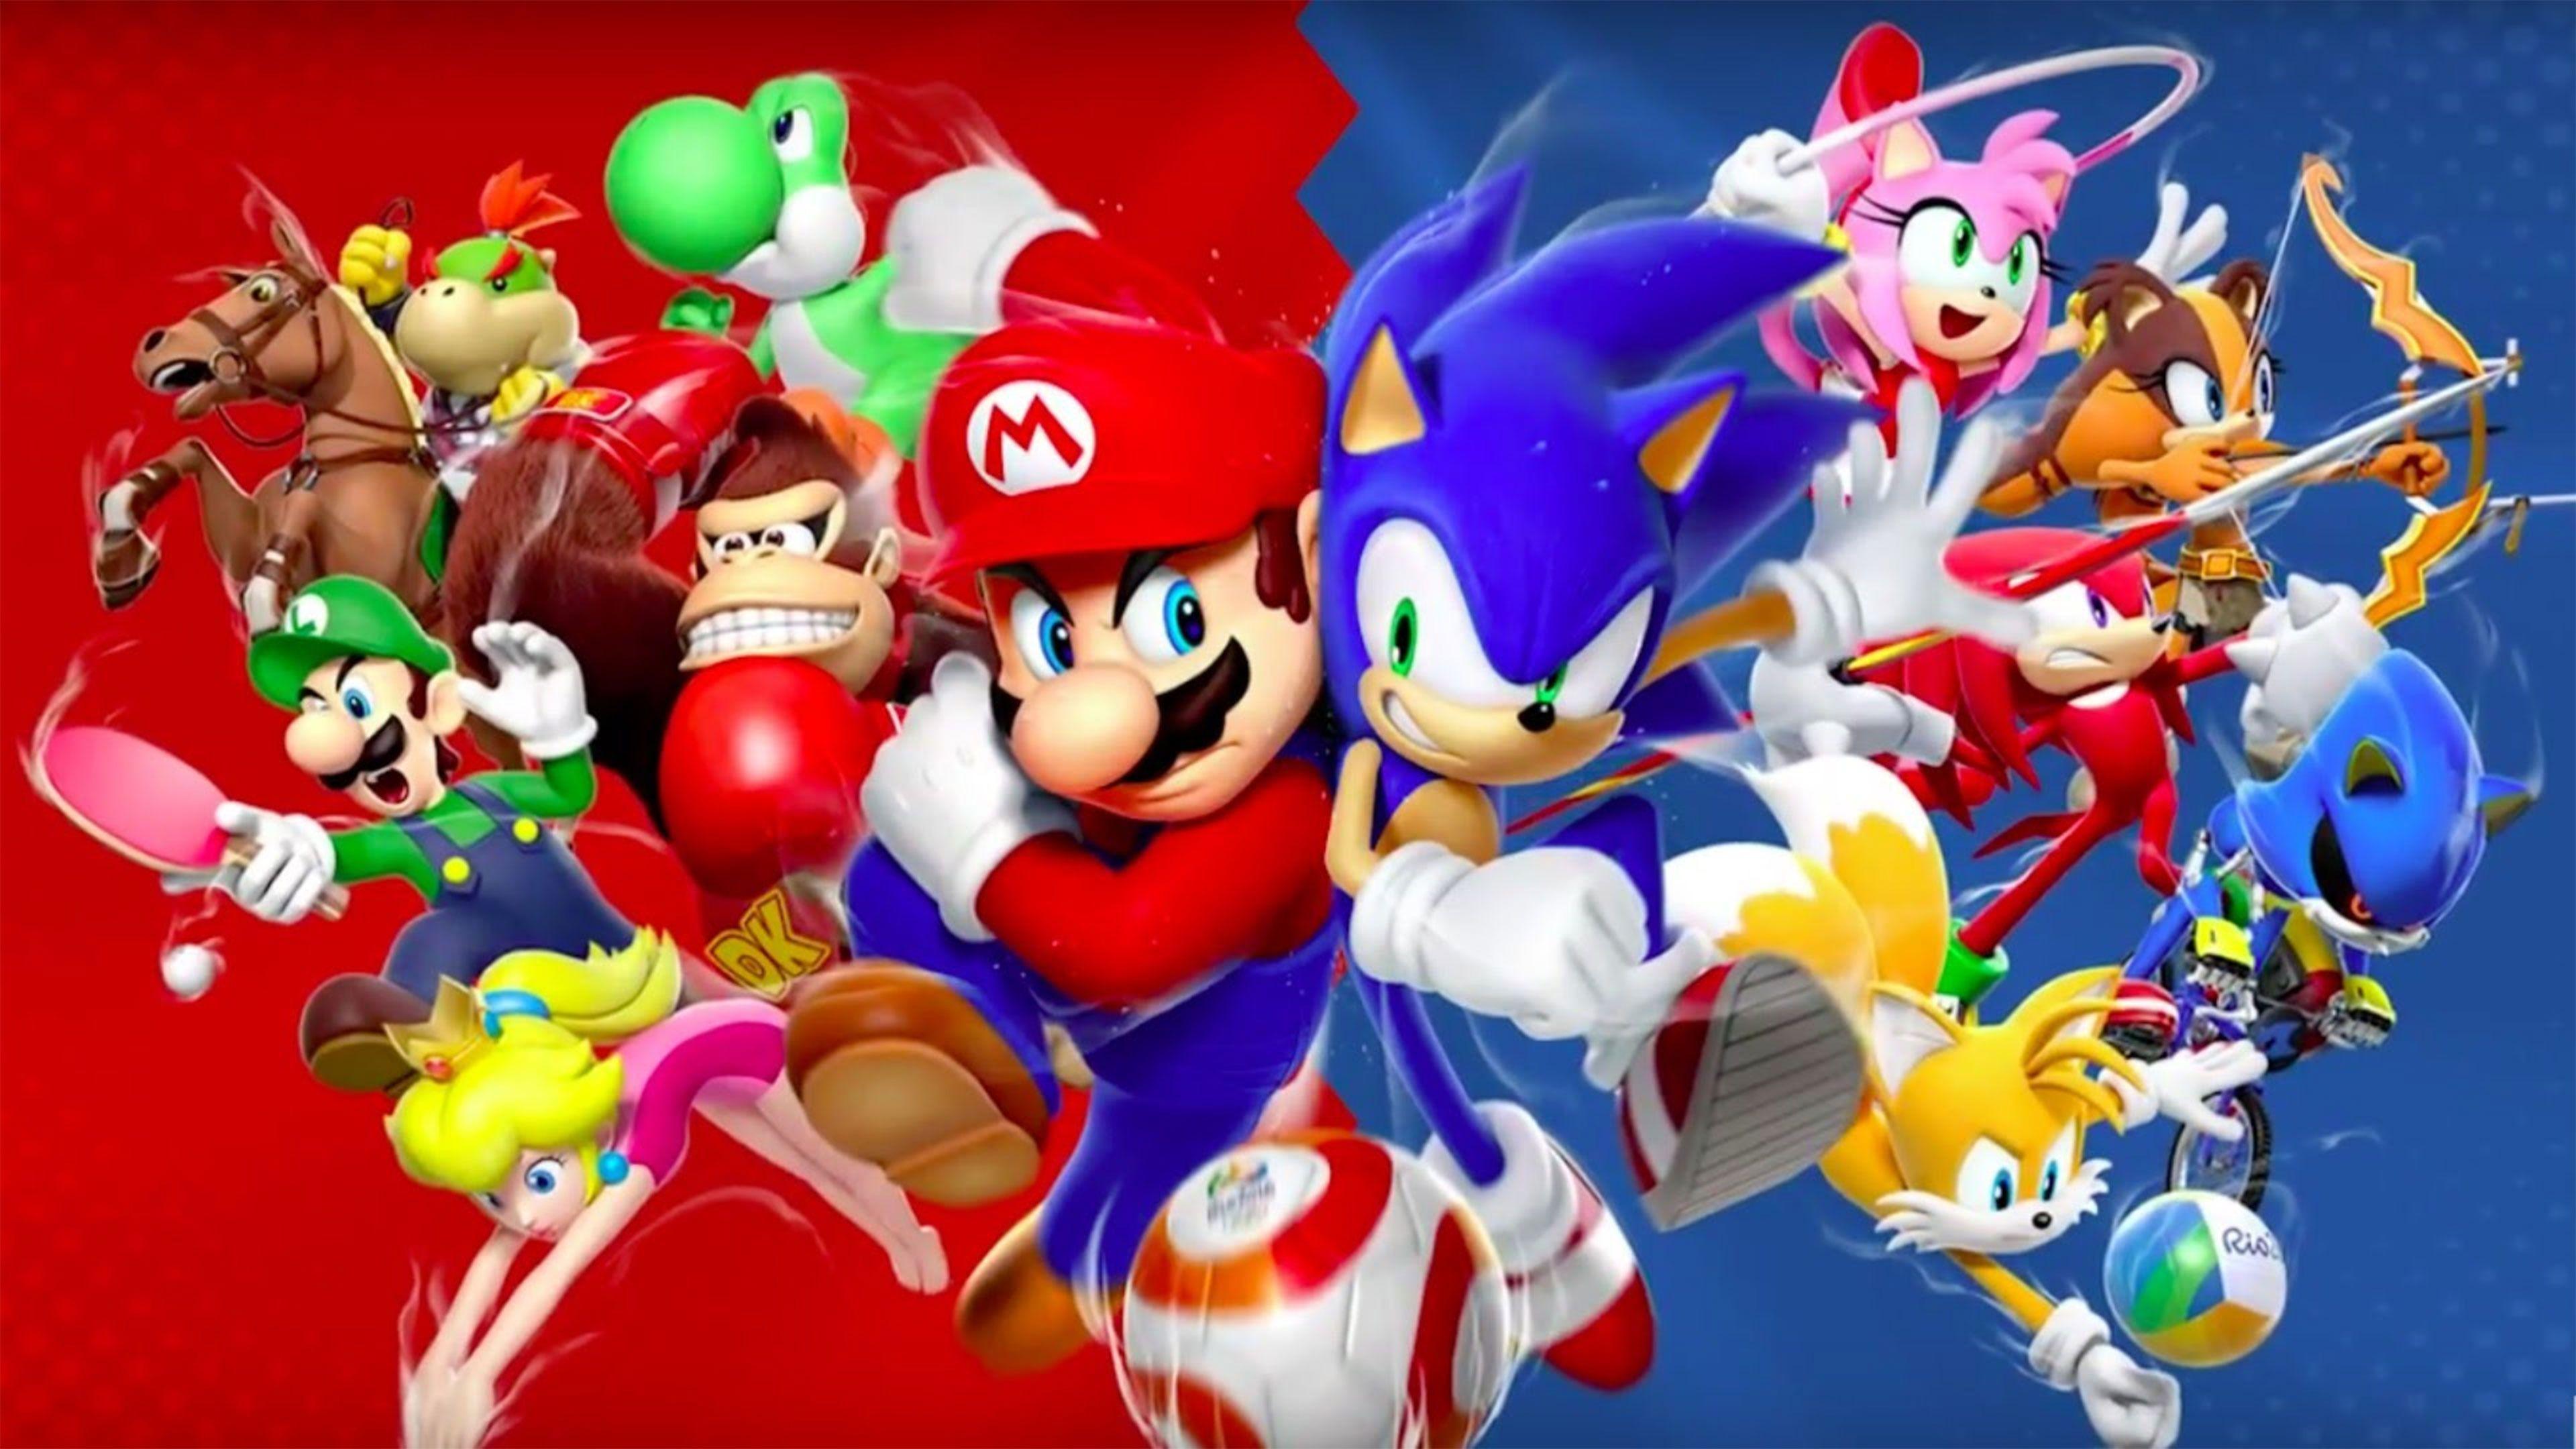 Mario and Sonic at the Rio 2016 Olympic Games Wallpaper in Ultra HD